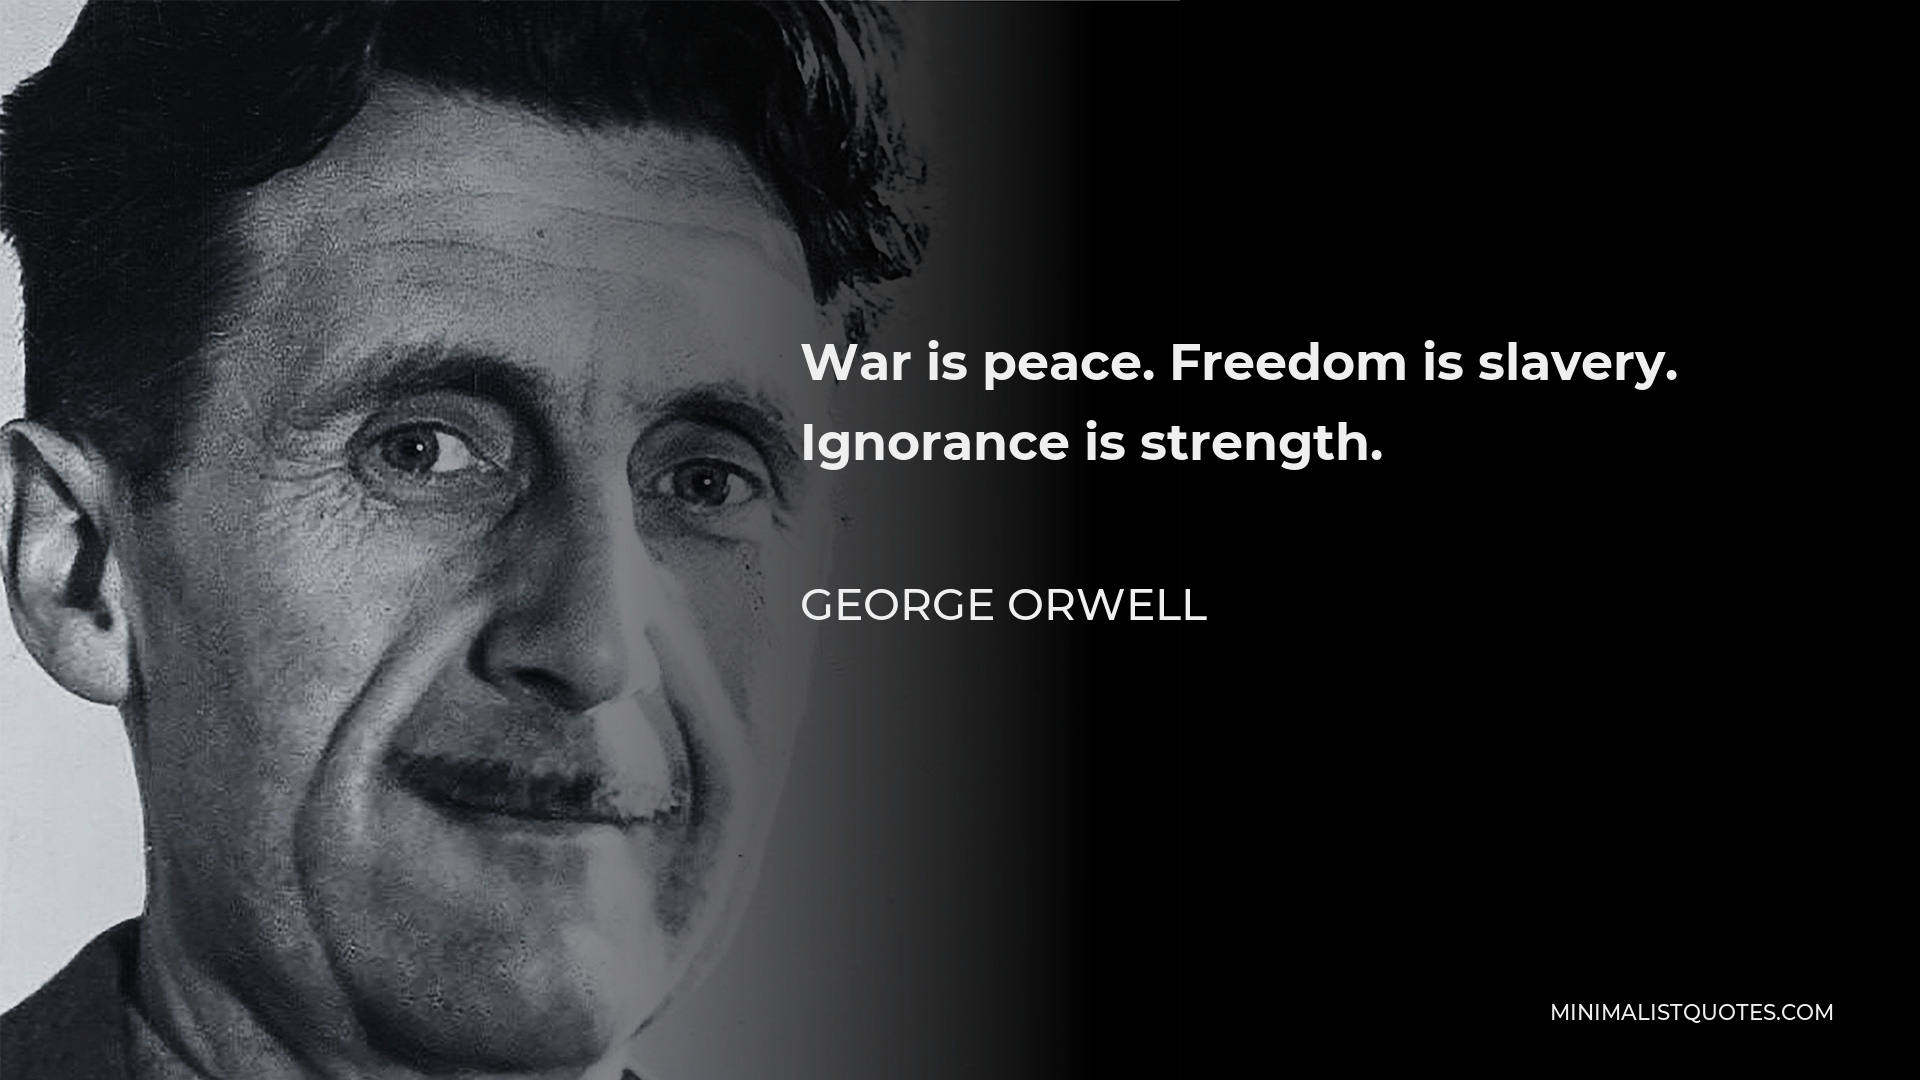 George Orwell Quote - War is peace. Freedom is slavery. Ignorance is strength.